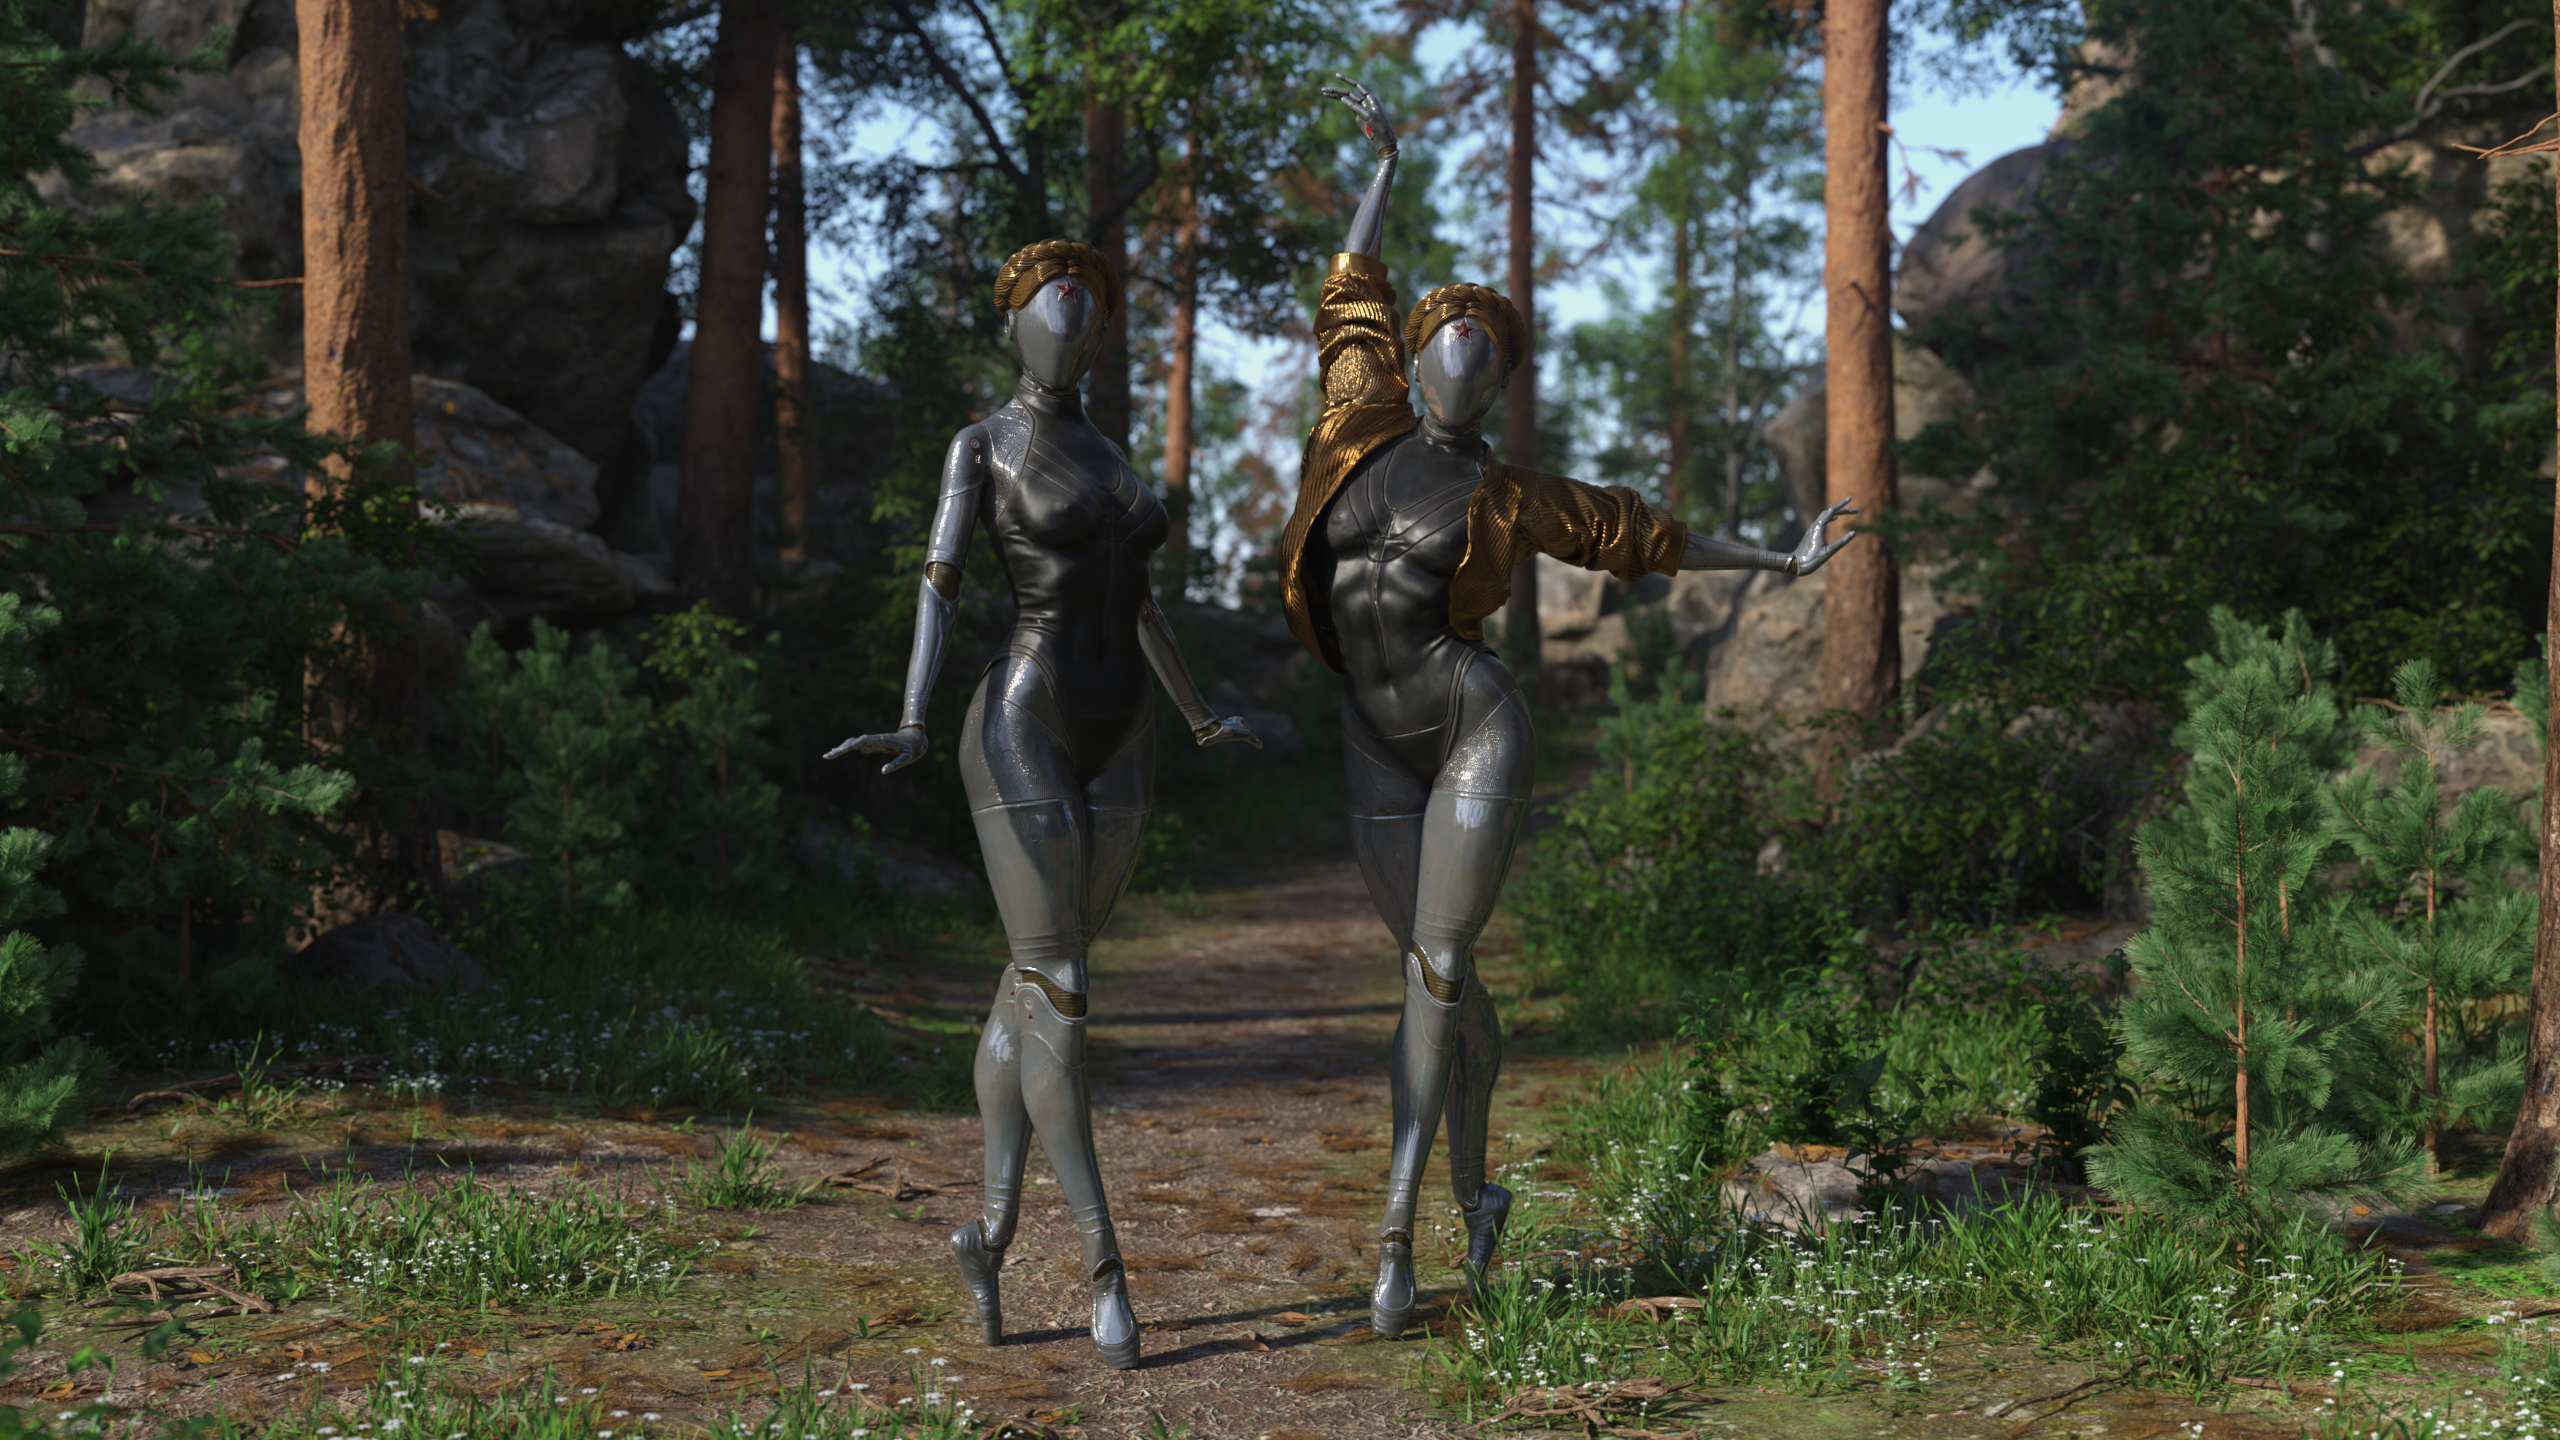 General 2560x1440 Atomic Heart Daz 3D CGI video games The Twins (Atomic Heart) video game characters path forest trees